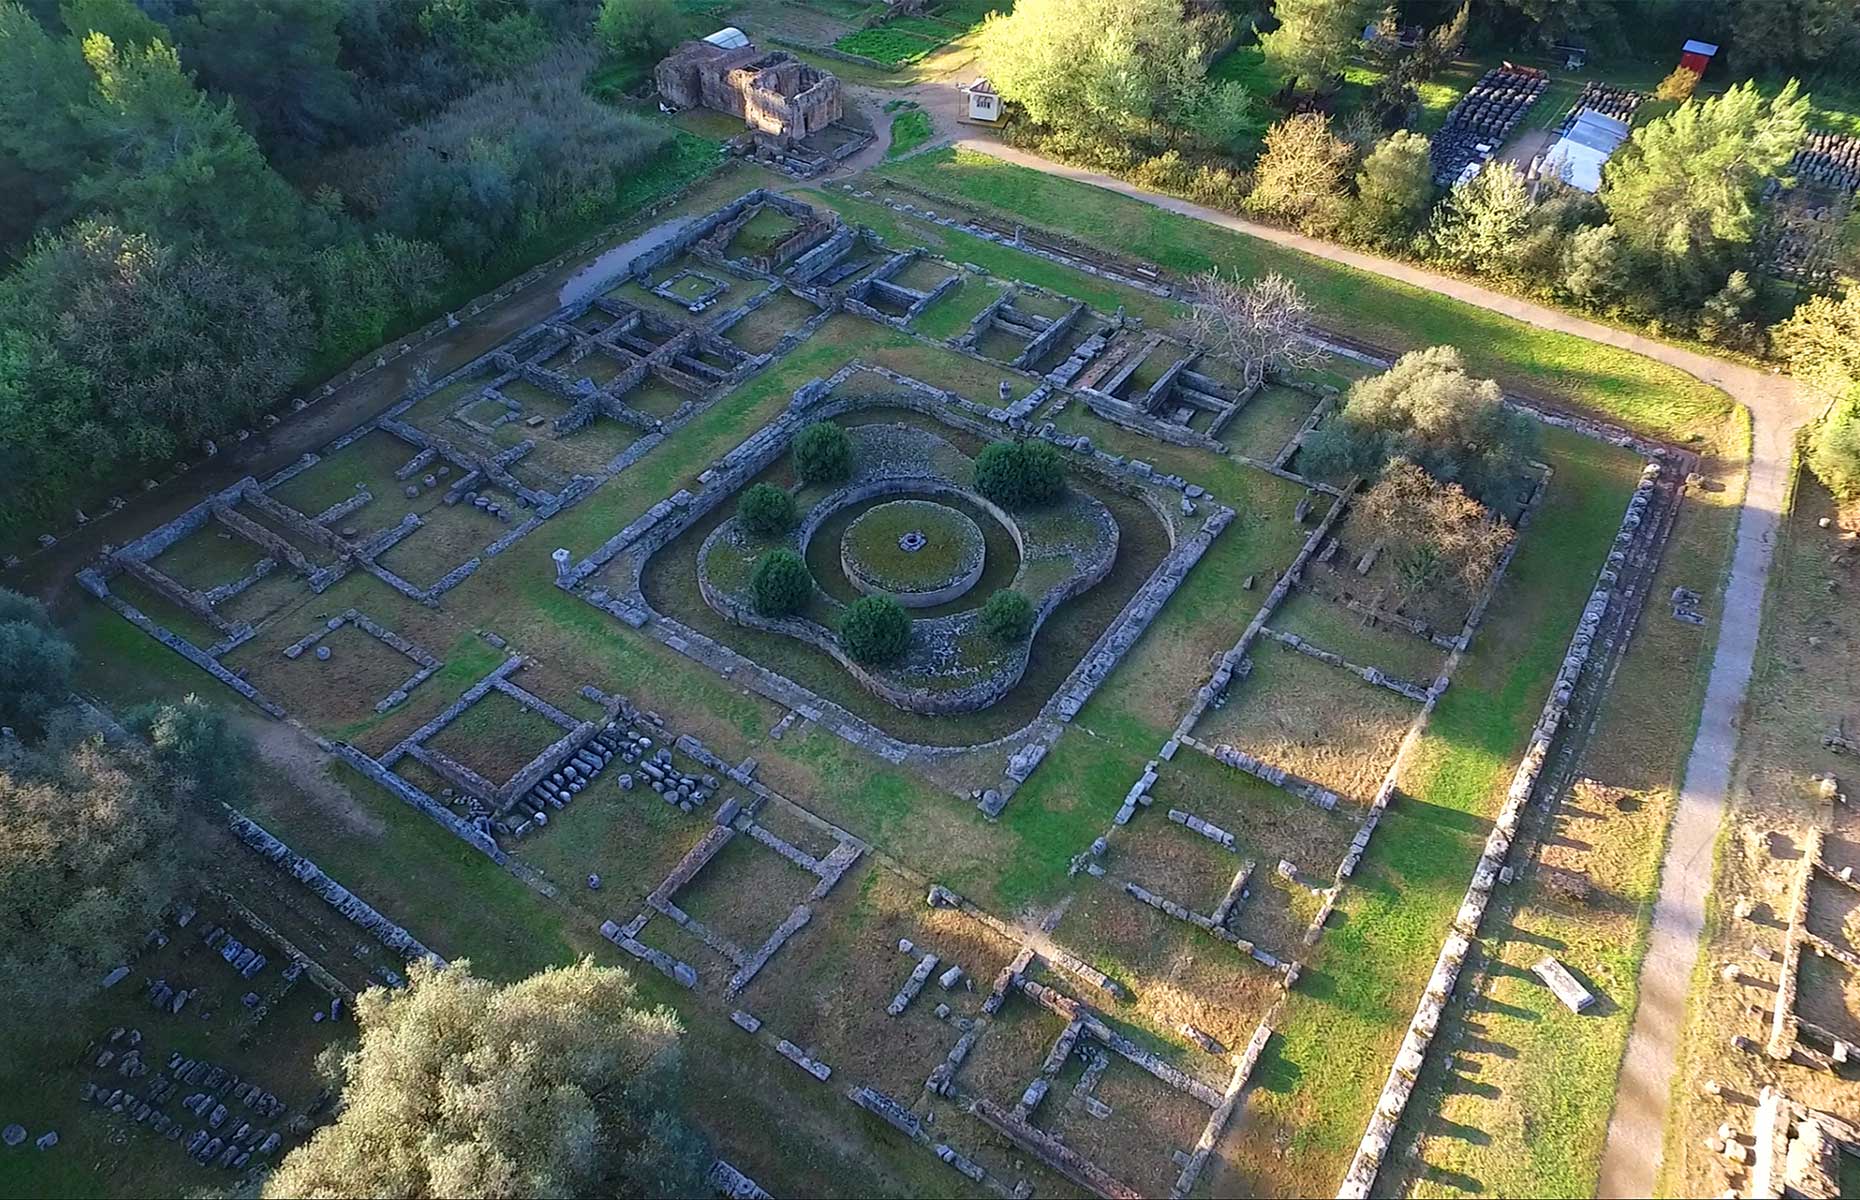 Drone view of Olympia, Greece. (Image: Aerial-motion/Shutterstock)